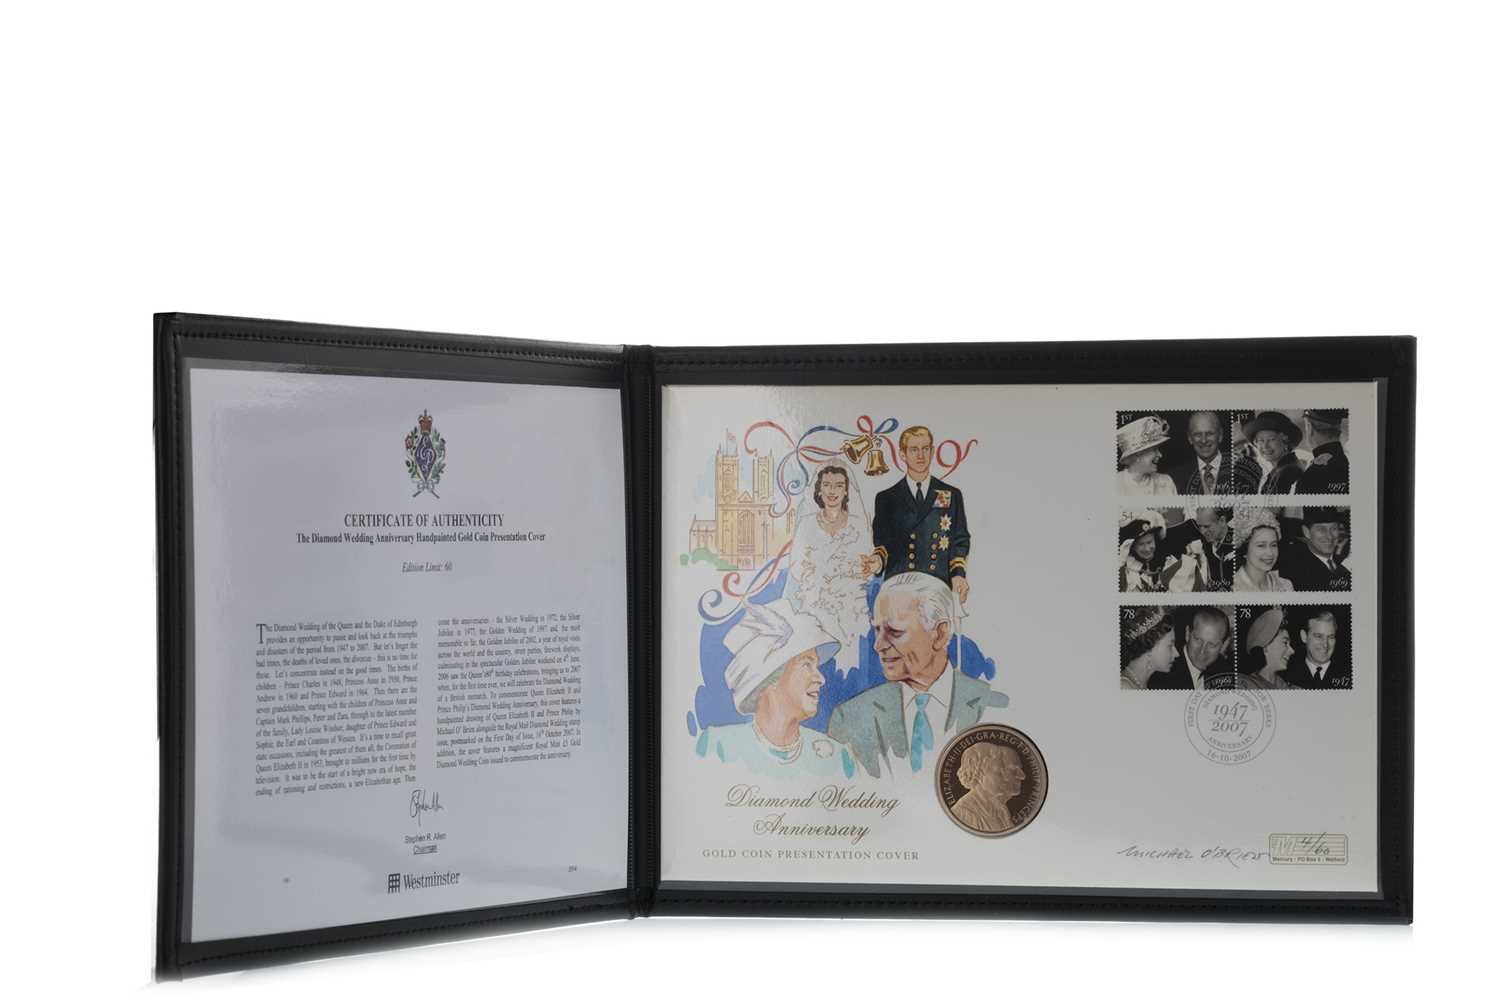 Lot 16 - THE DIAMOND WEDDING ANNIVERSARY HANDPAINTED GOLD FIVE POUND £5 COIN PRESENTATION COVER